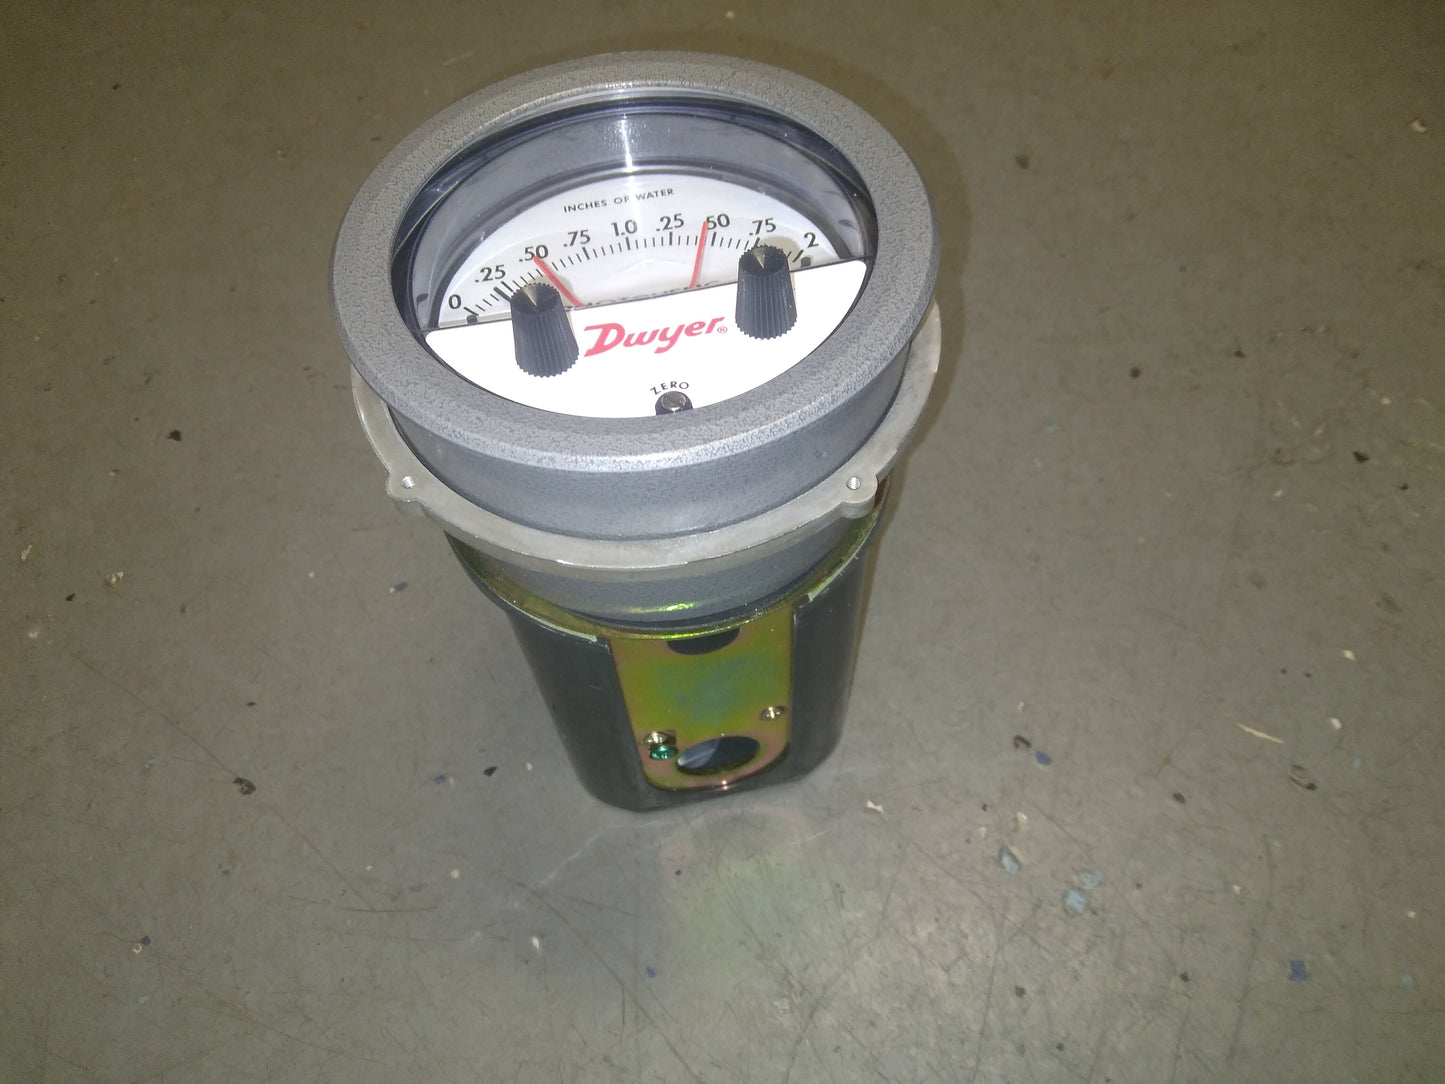 PHOTOHELIC DIFFERENTIAL PRESSURE GAUGE.TYPE 0 TO 2" WC